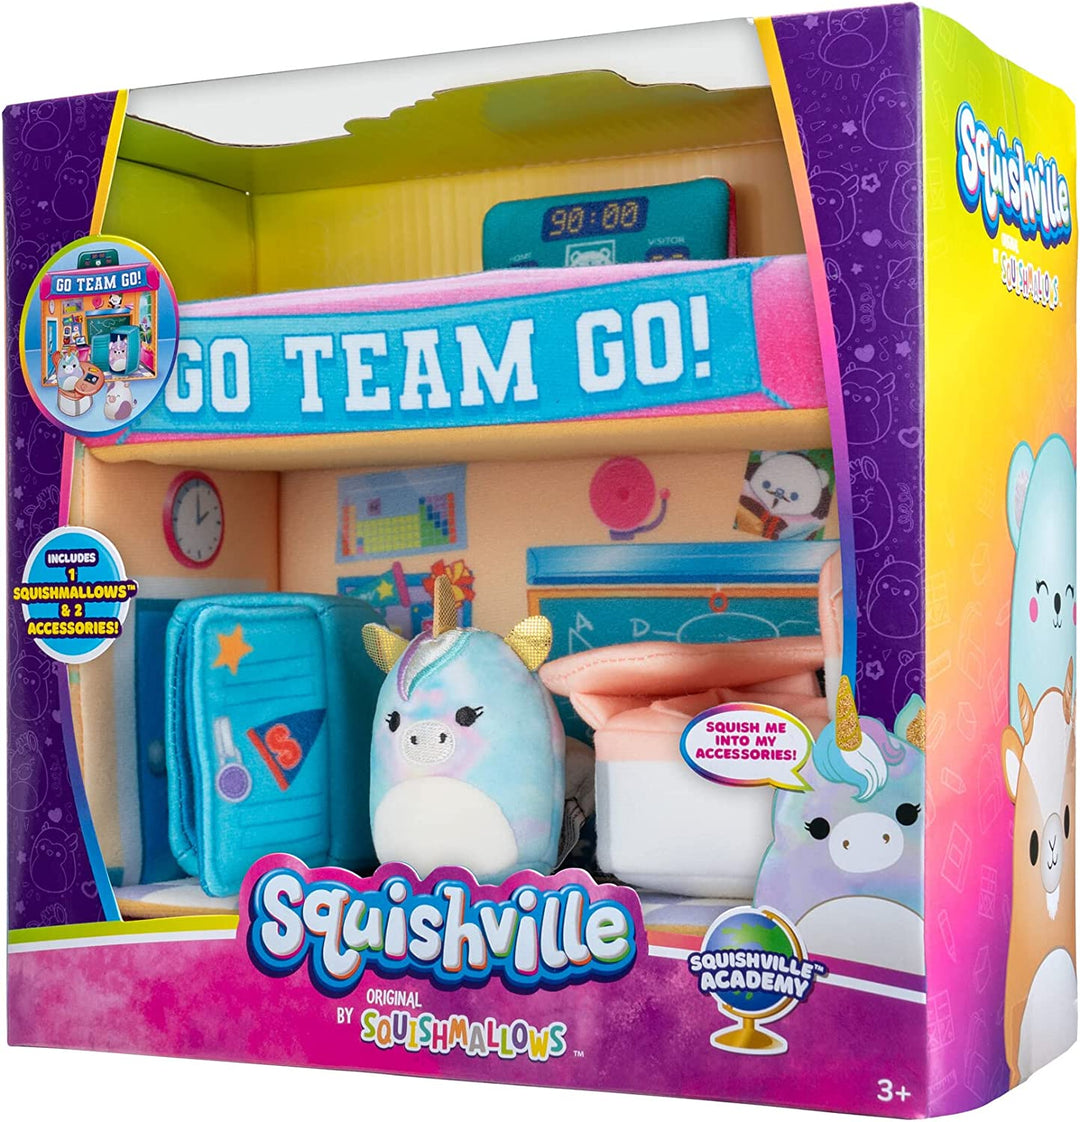 Squishville SQM0325 Deluxe Academy Playscene-Include 2-Inch Plush Accessories-To